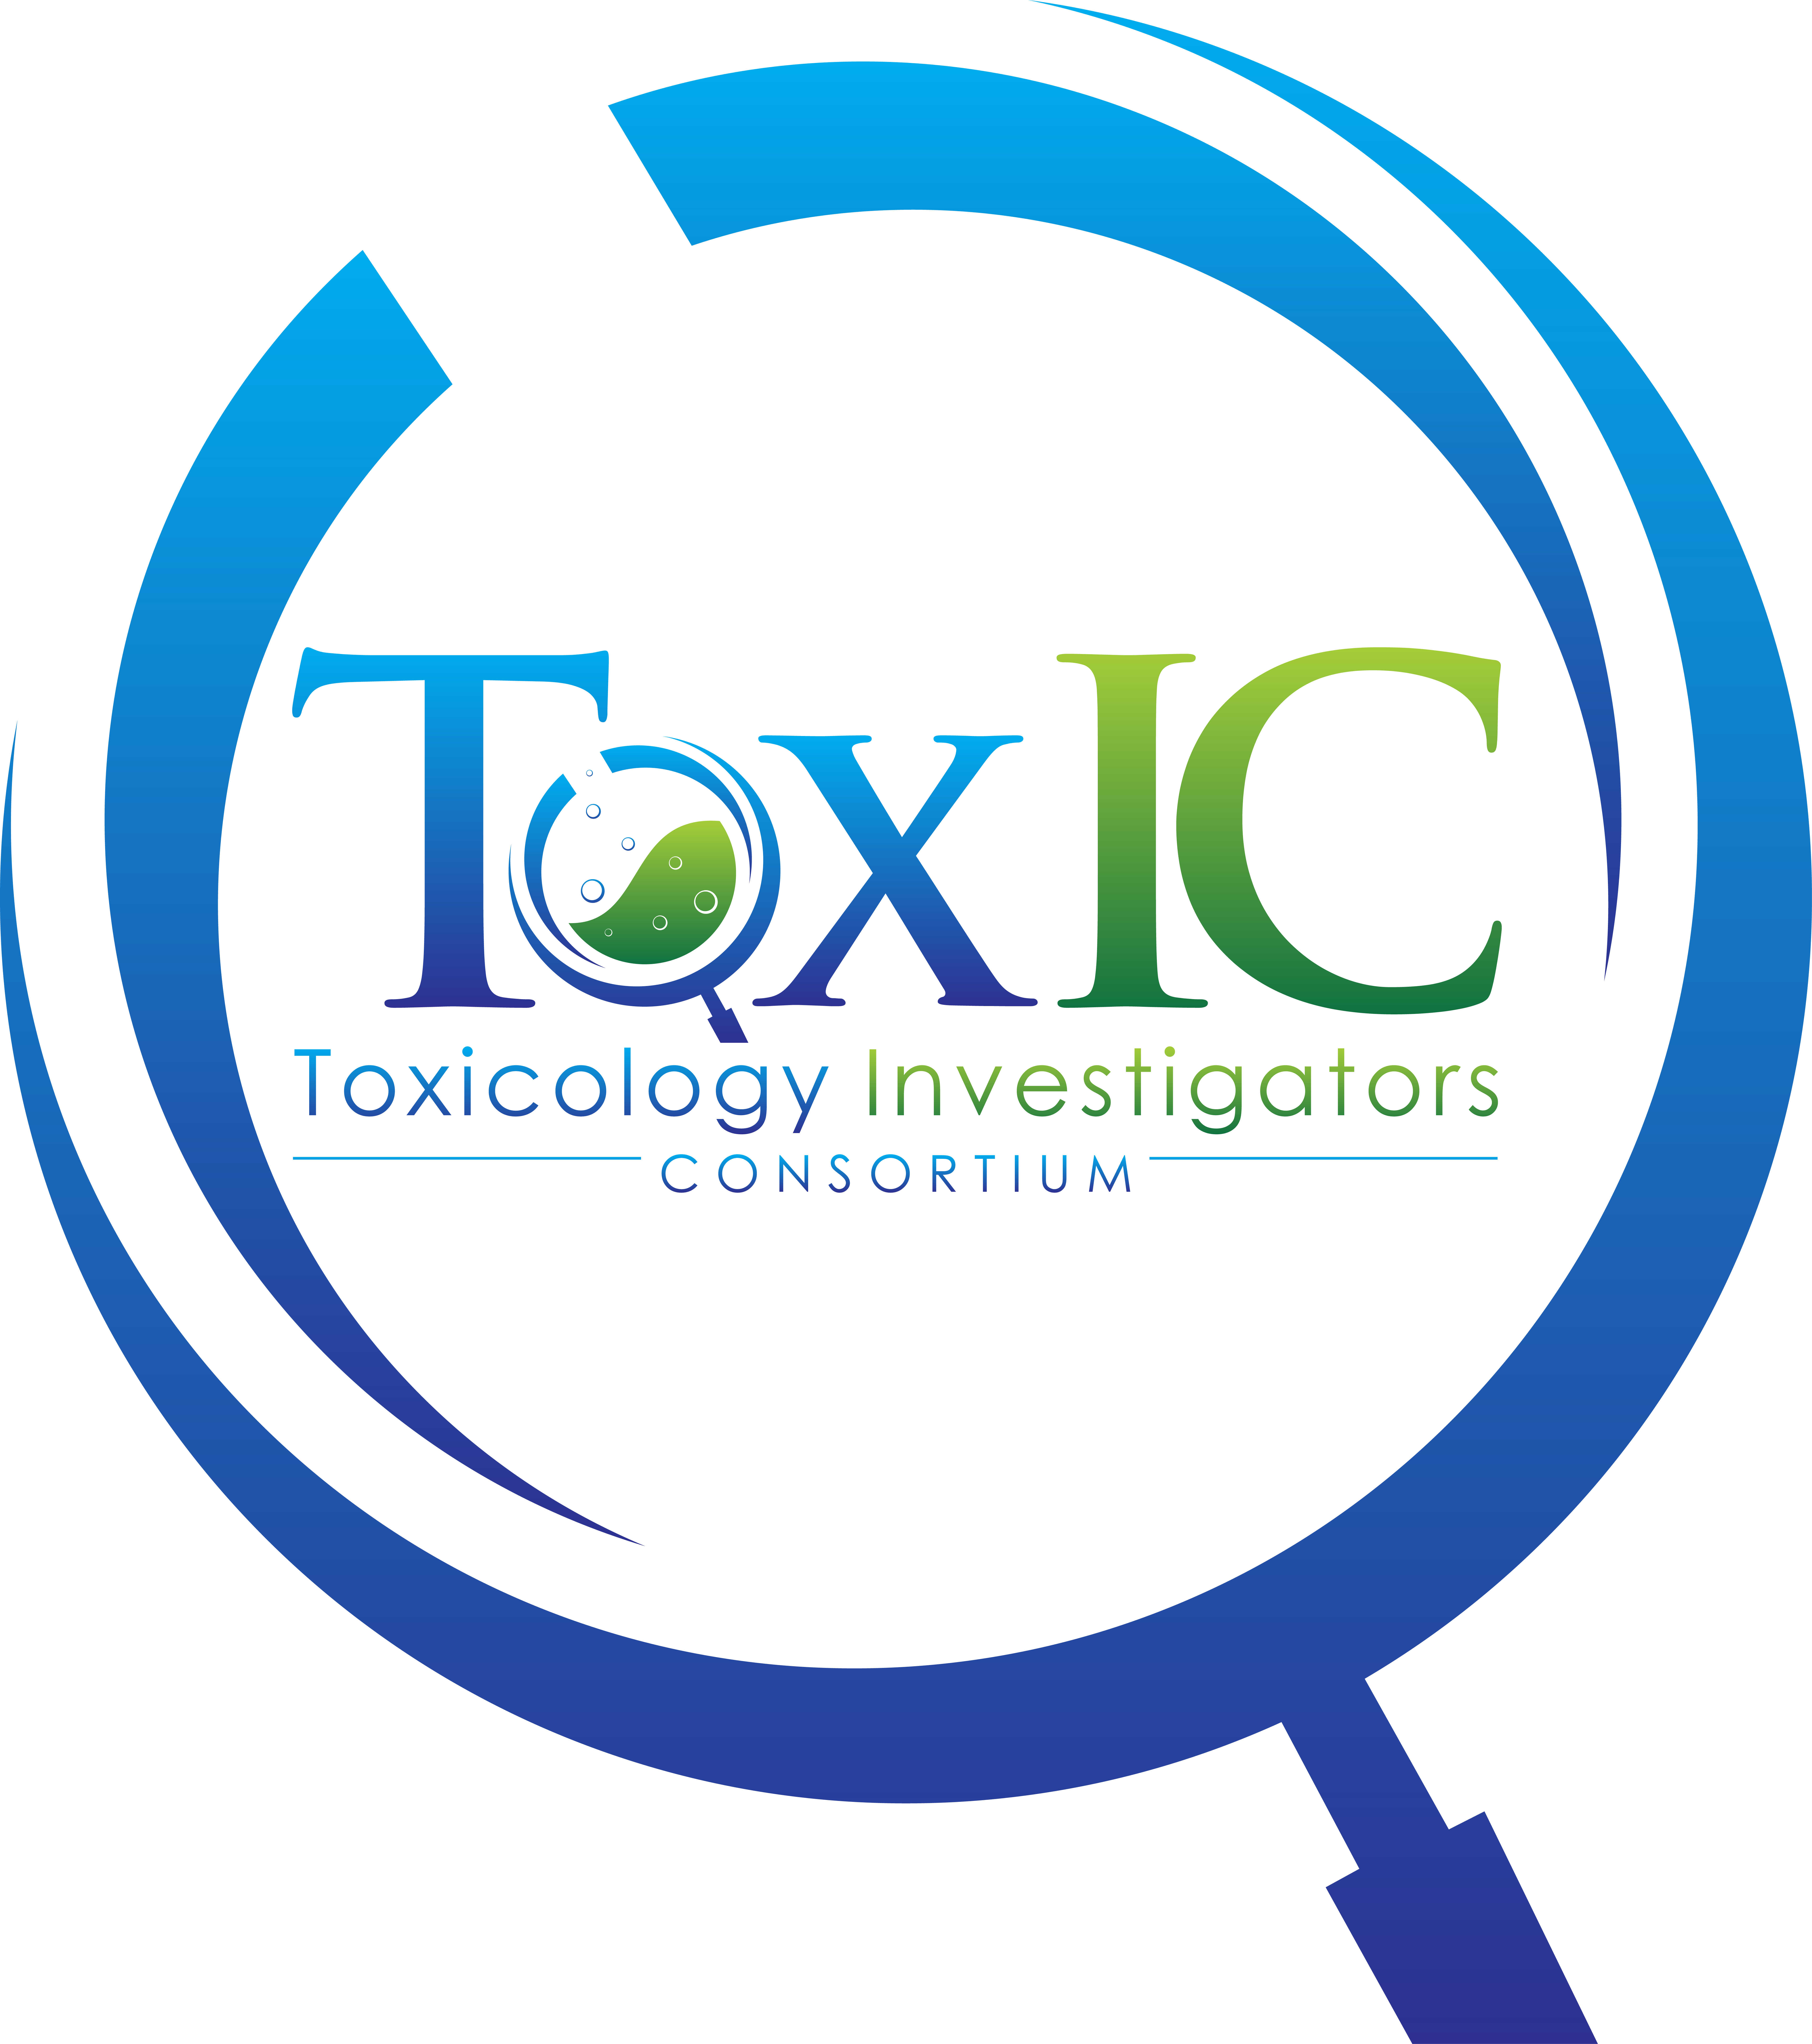 The Toxicology Investigators Consortium (ToxIC) is a multicenter toxico-surveillance and research network of physicians specifically qualified in the field of medical toxicology. Currently there are 45 participating sites comprising nearly 100 hospitals and clinics in the U.S. and 5 international sites. 